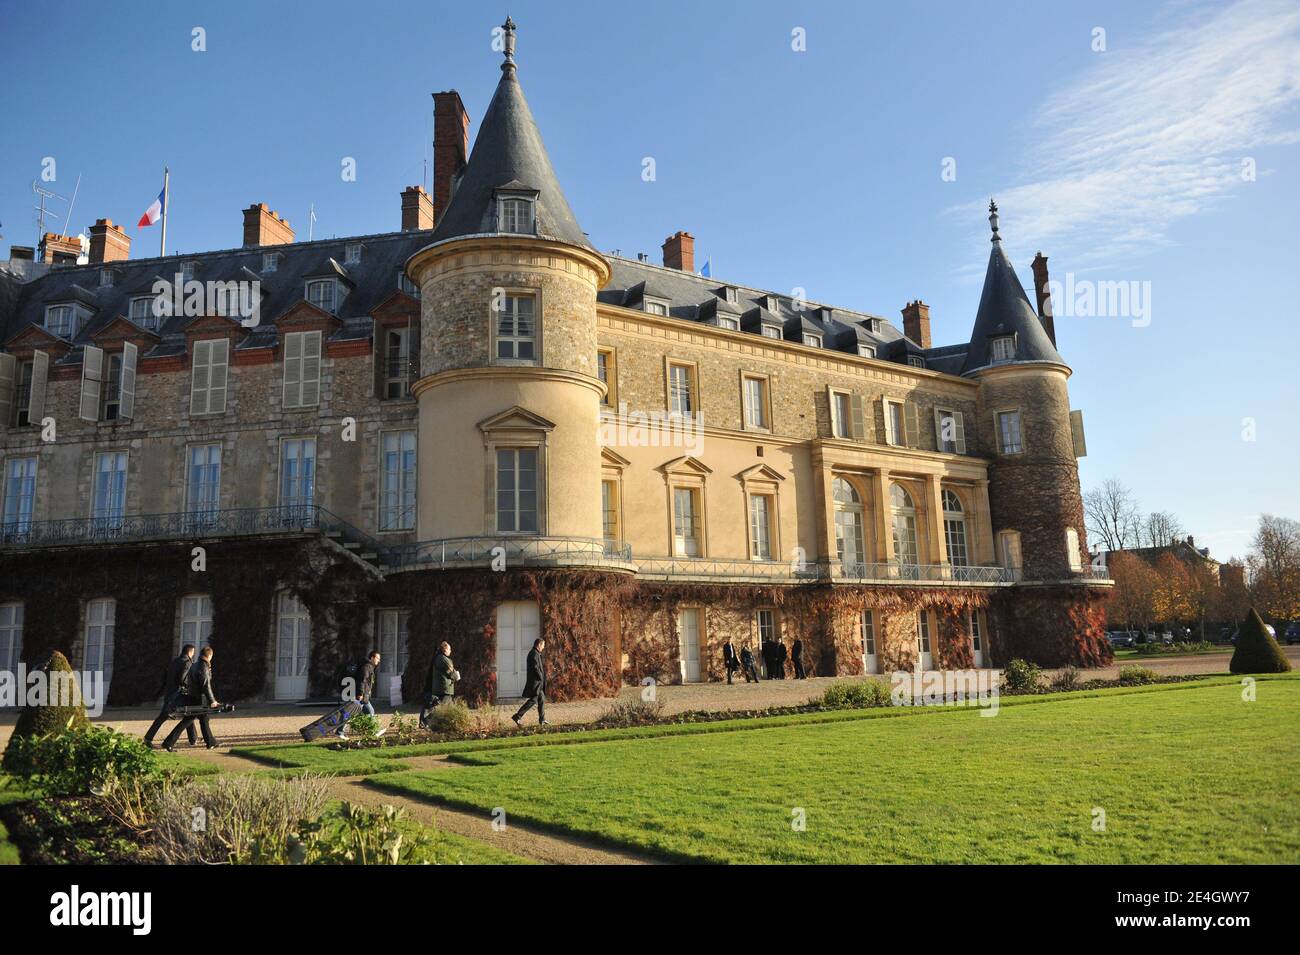 View of the Rambouillet' castle during Franco-russian seminary session in Rambouillet, west of Paris, France on November 27, 2009. Photo by Thierry Orban/ABACAPRESSS.COM Stock Photo